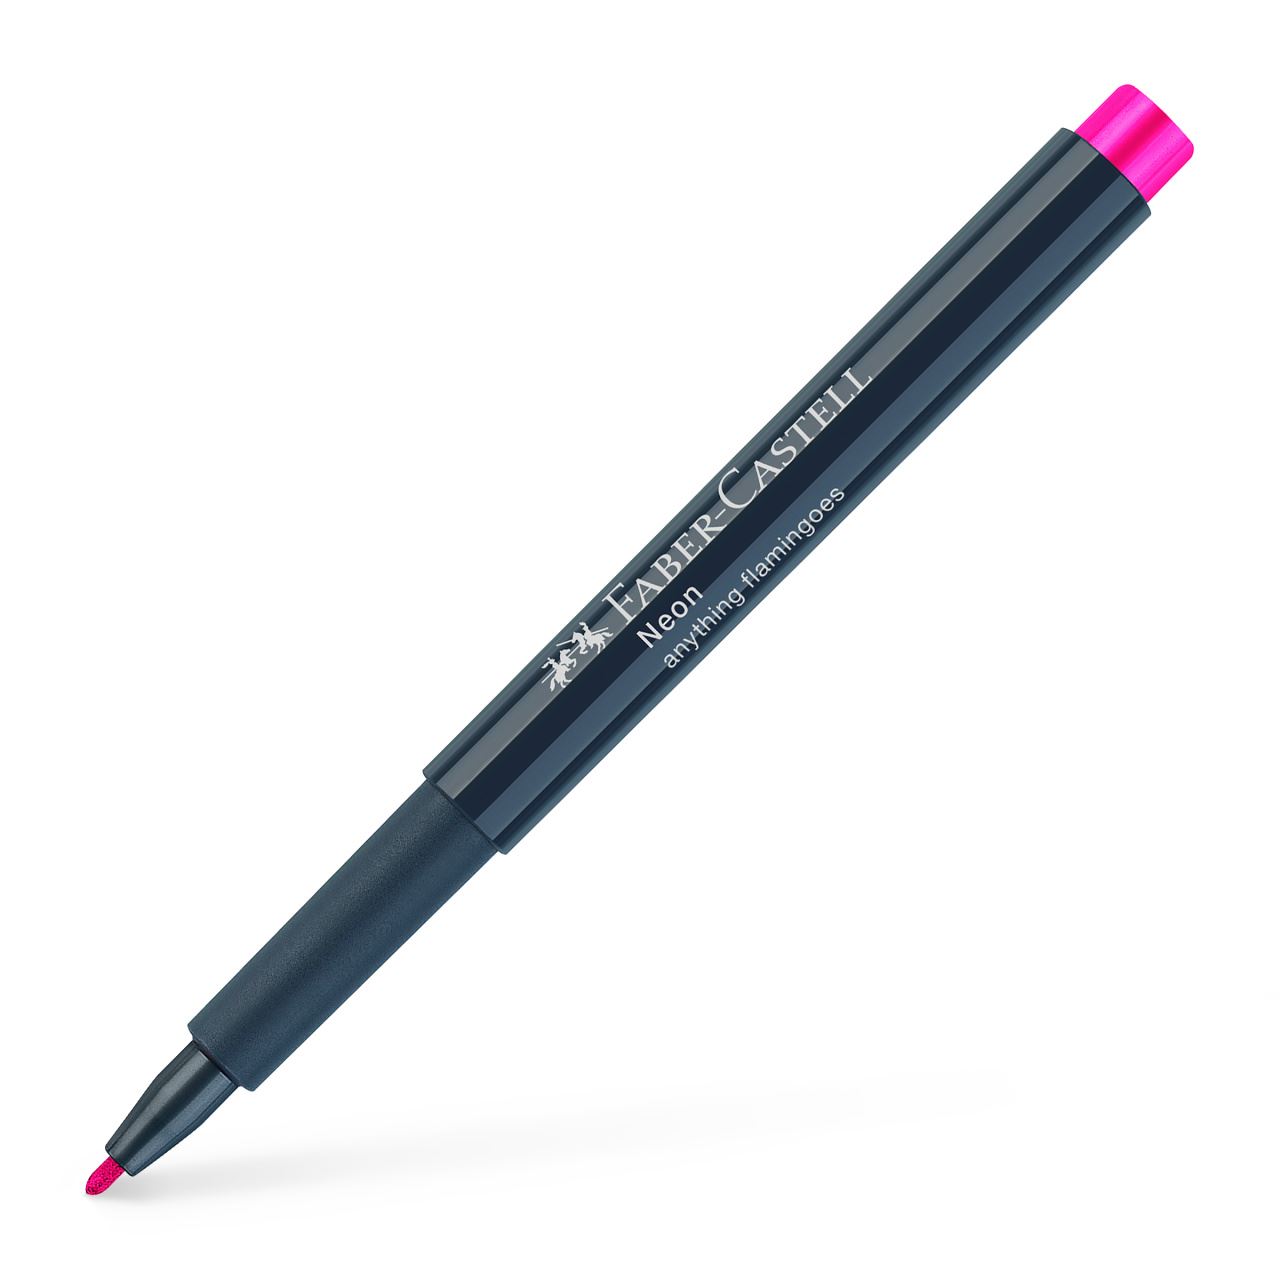 Faber-Castell - Marqueur Neon, couleur anything flamingoes